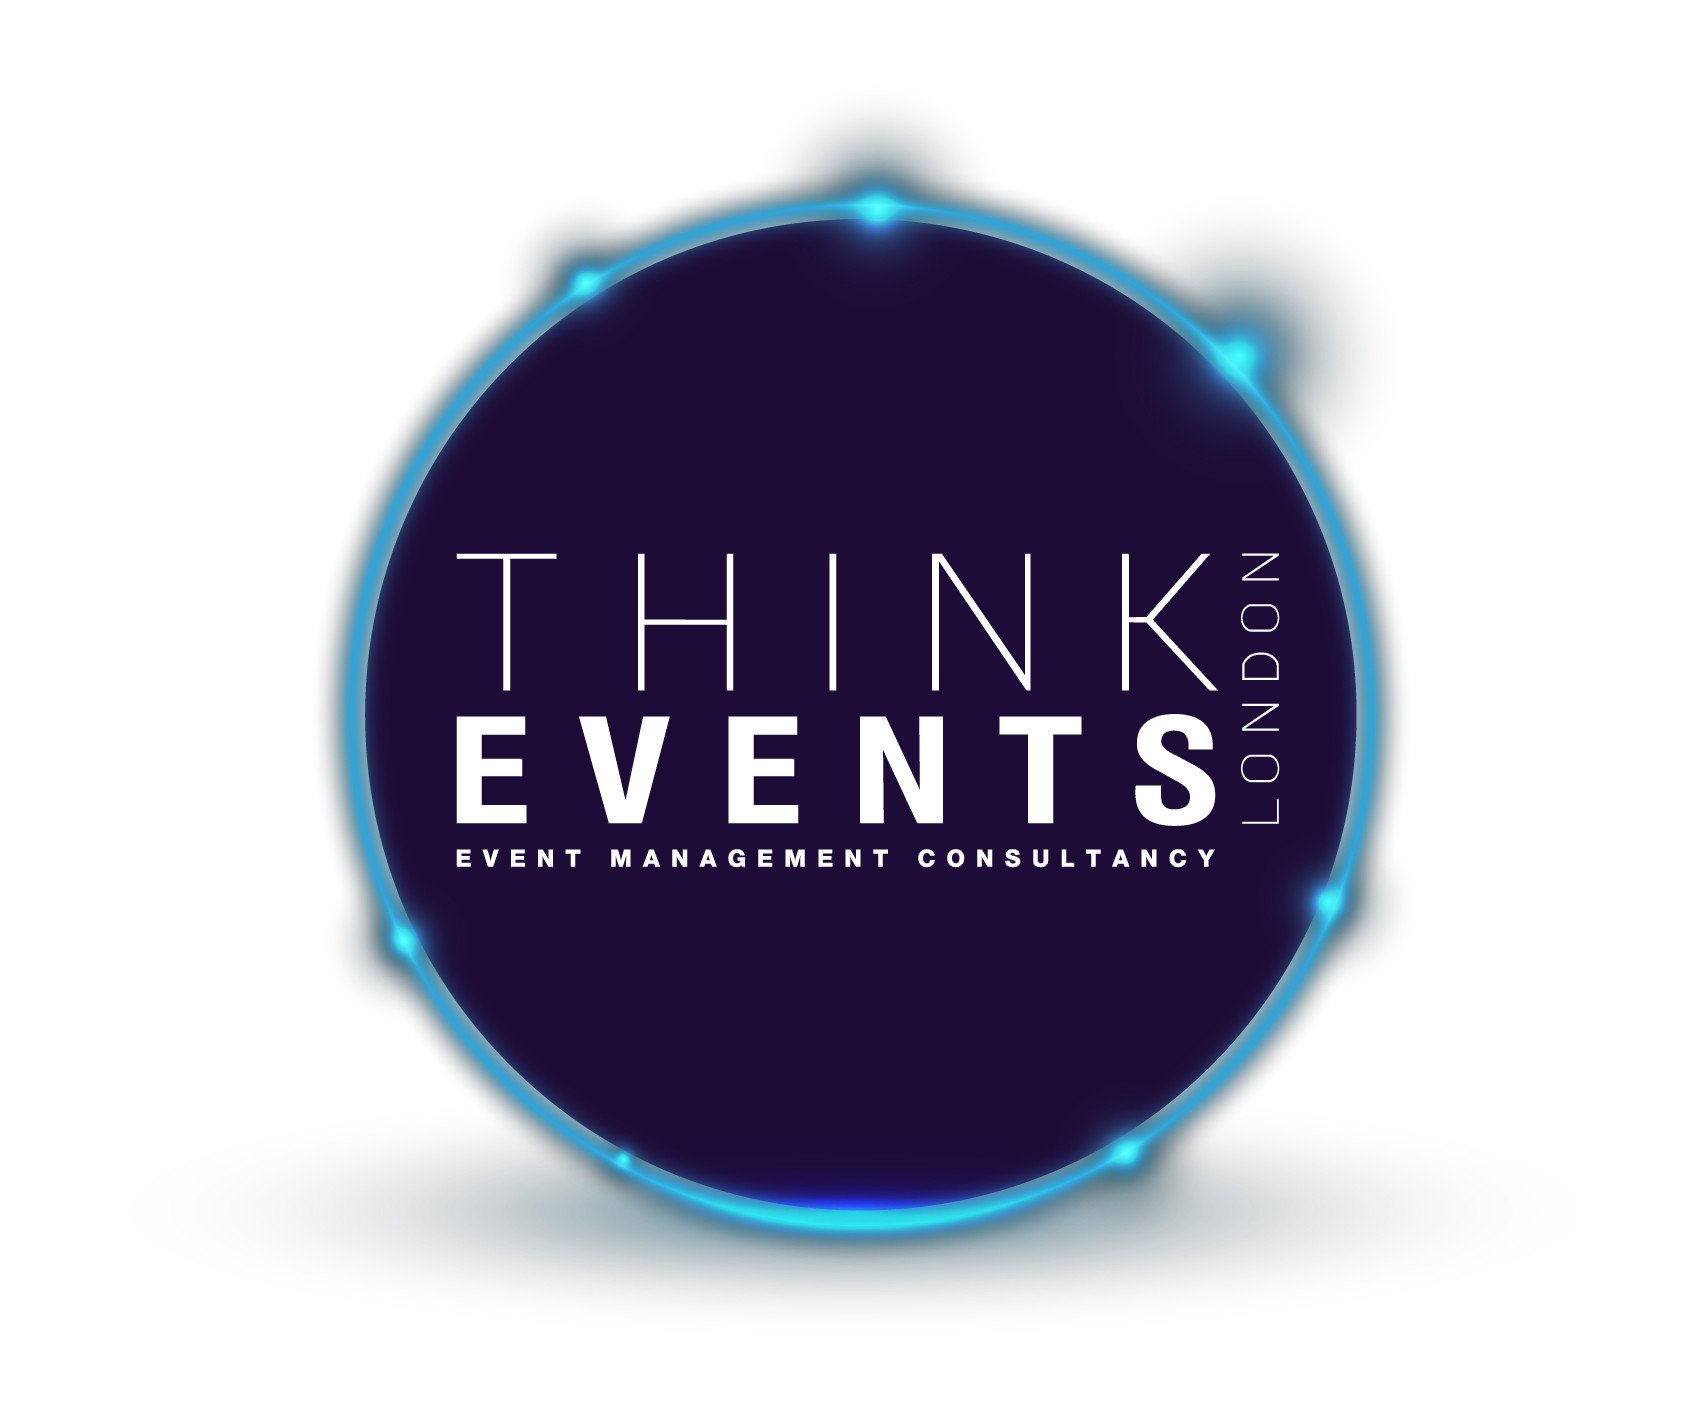 Software project for organizing events created by EntroSolutions